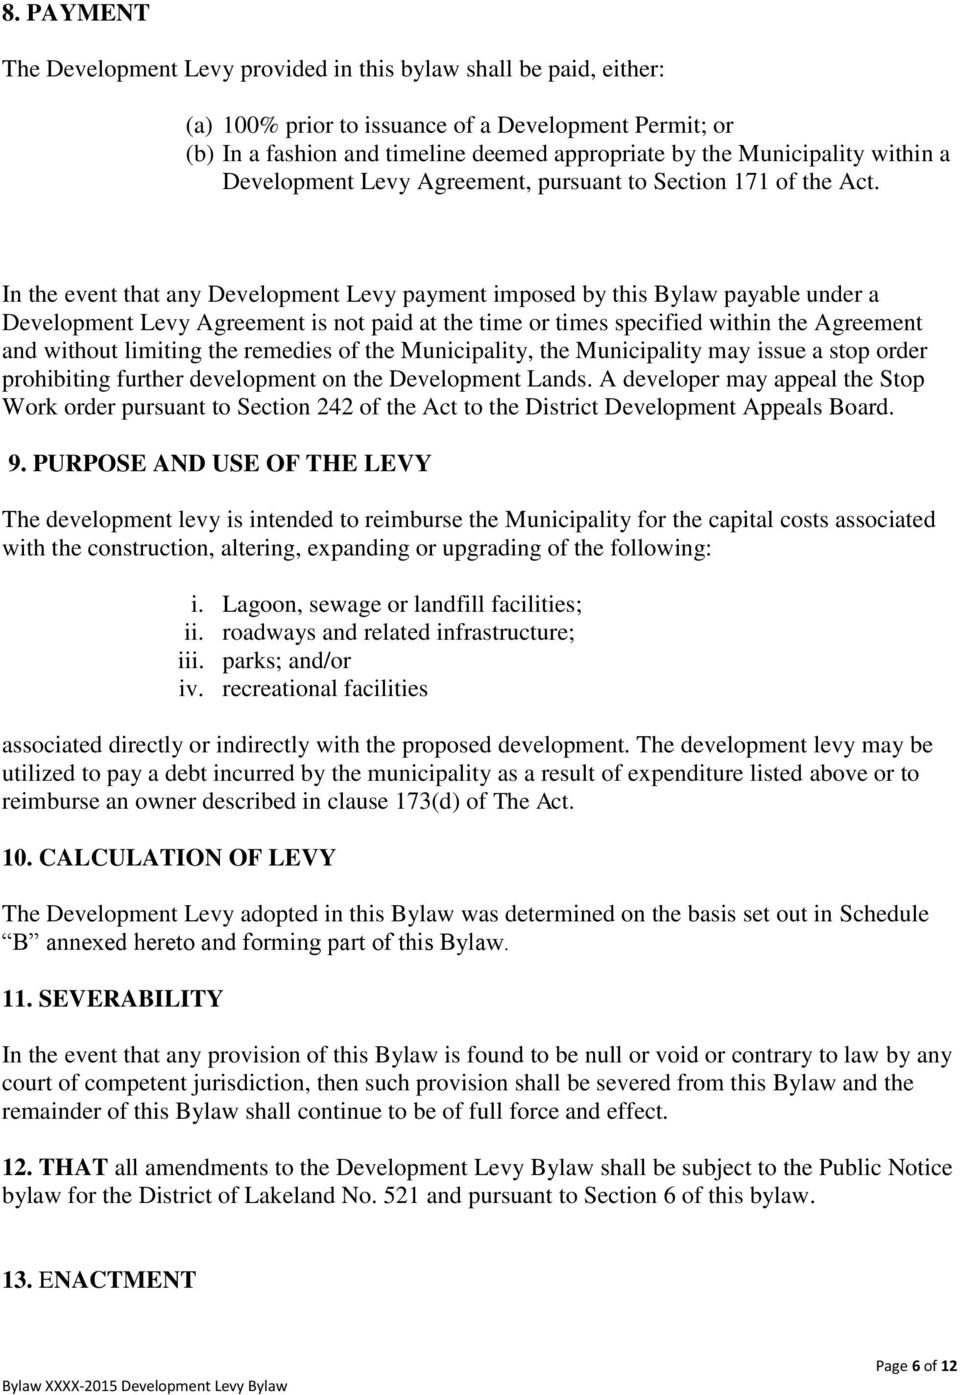 In the event that any Development Levy payment imposed by this Bylaw payable under a Development Levy Agreement is not paid at the time or times specified within the Agreement and without limiting